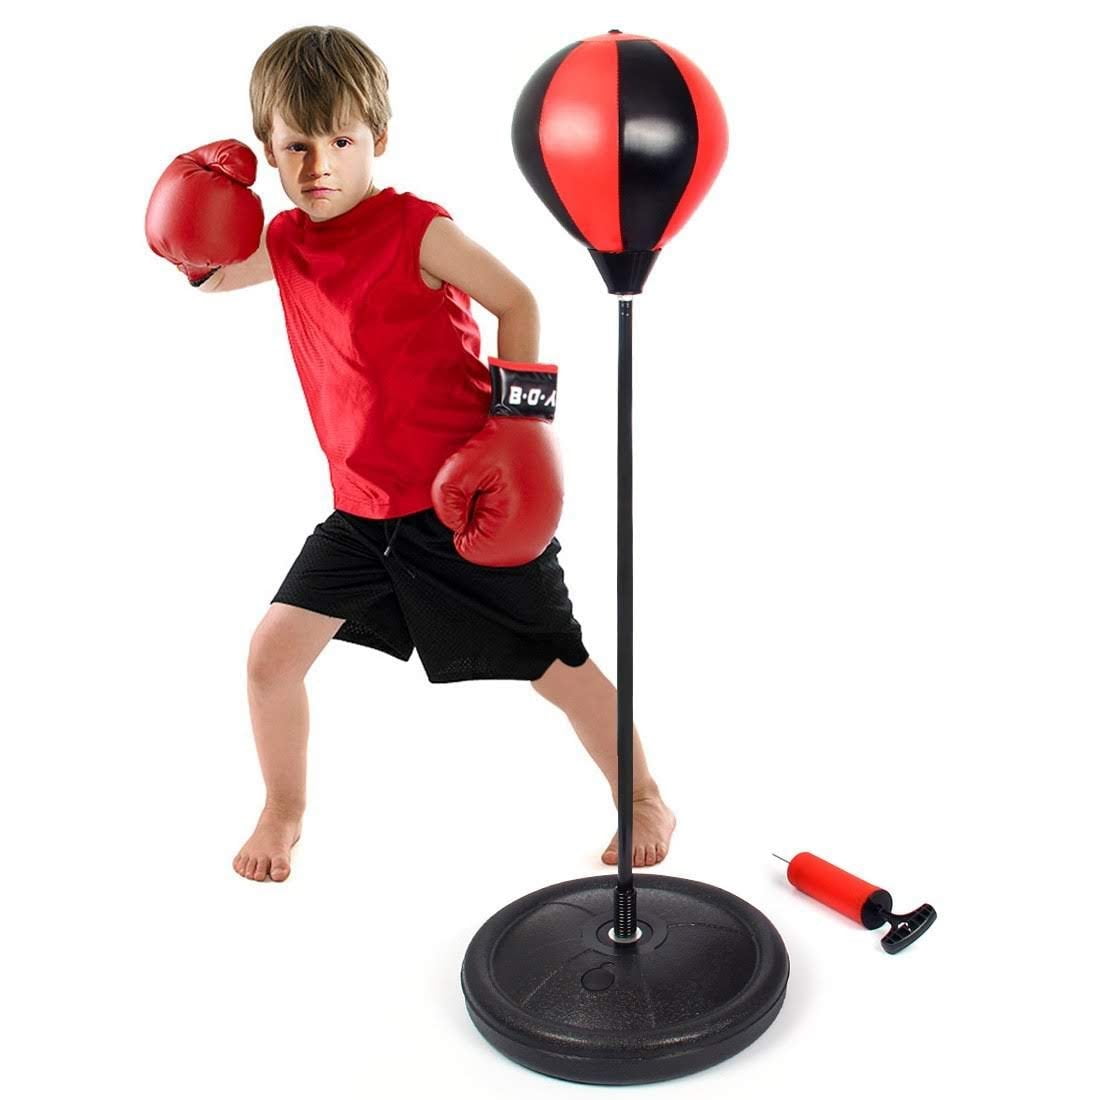 NSG JS1000 Boxing Set Red With Black Inflatable Punching Bag Spring Loaded Pole for sale online 